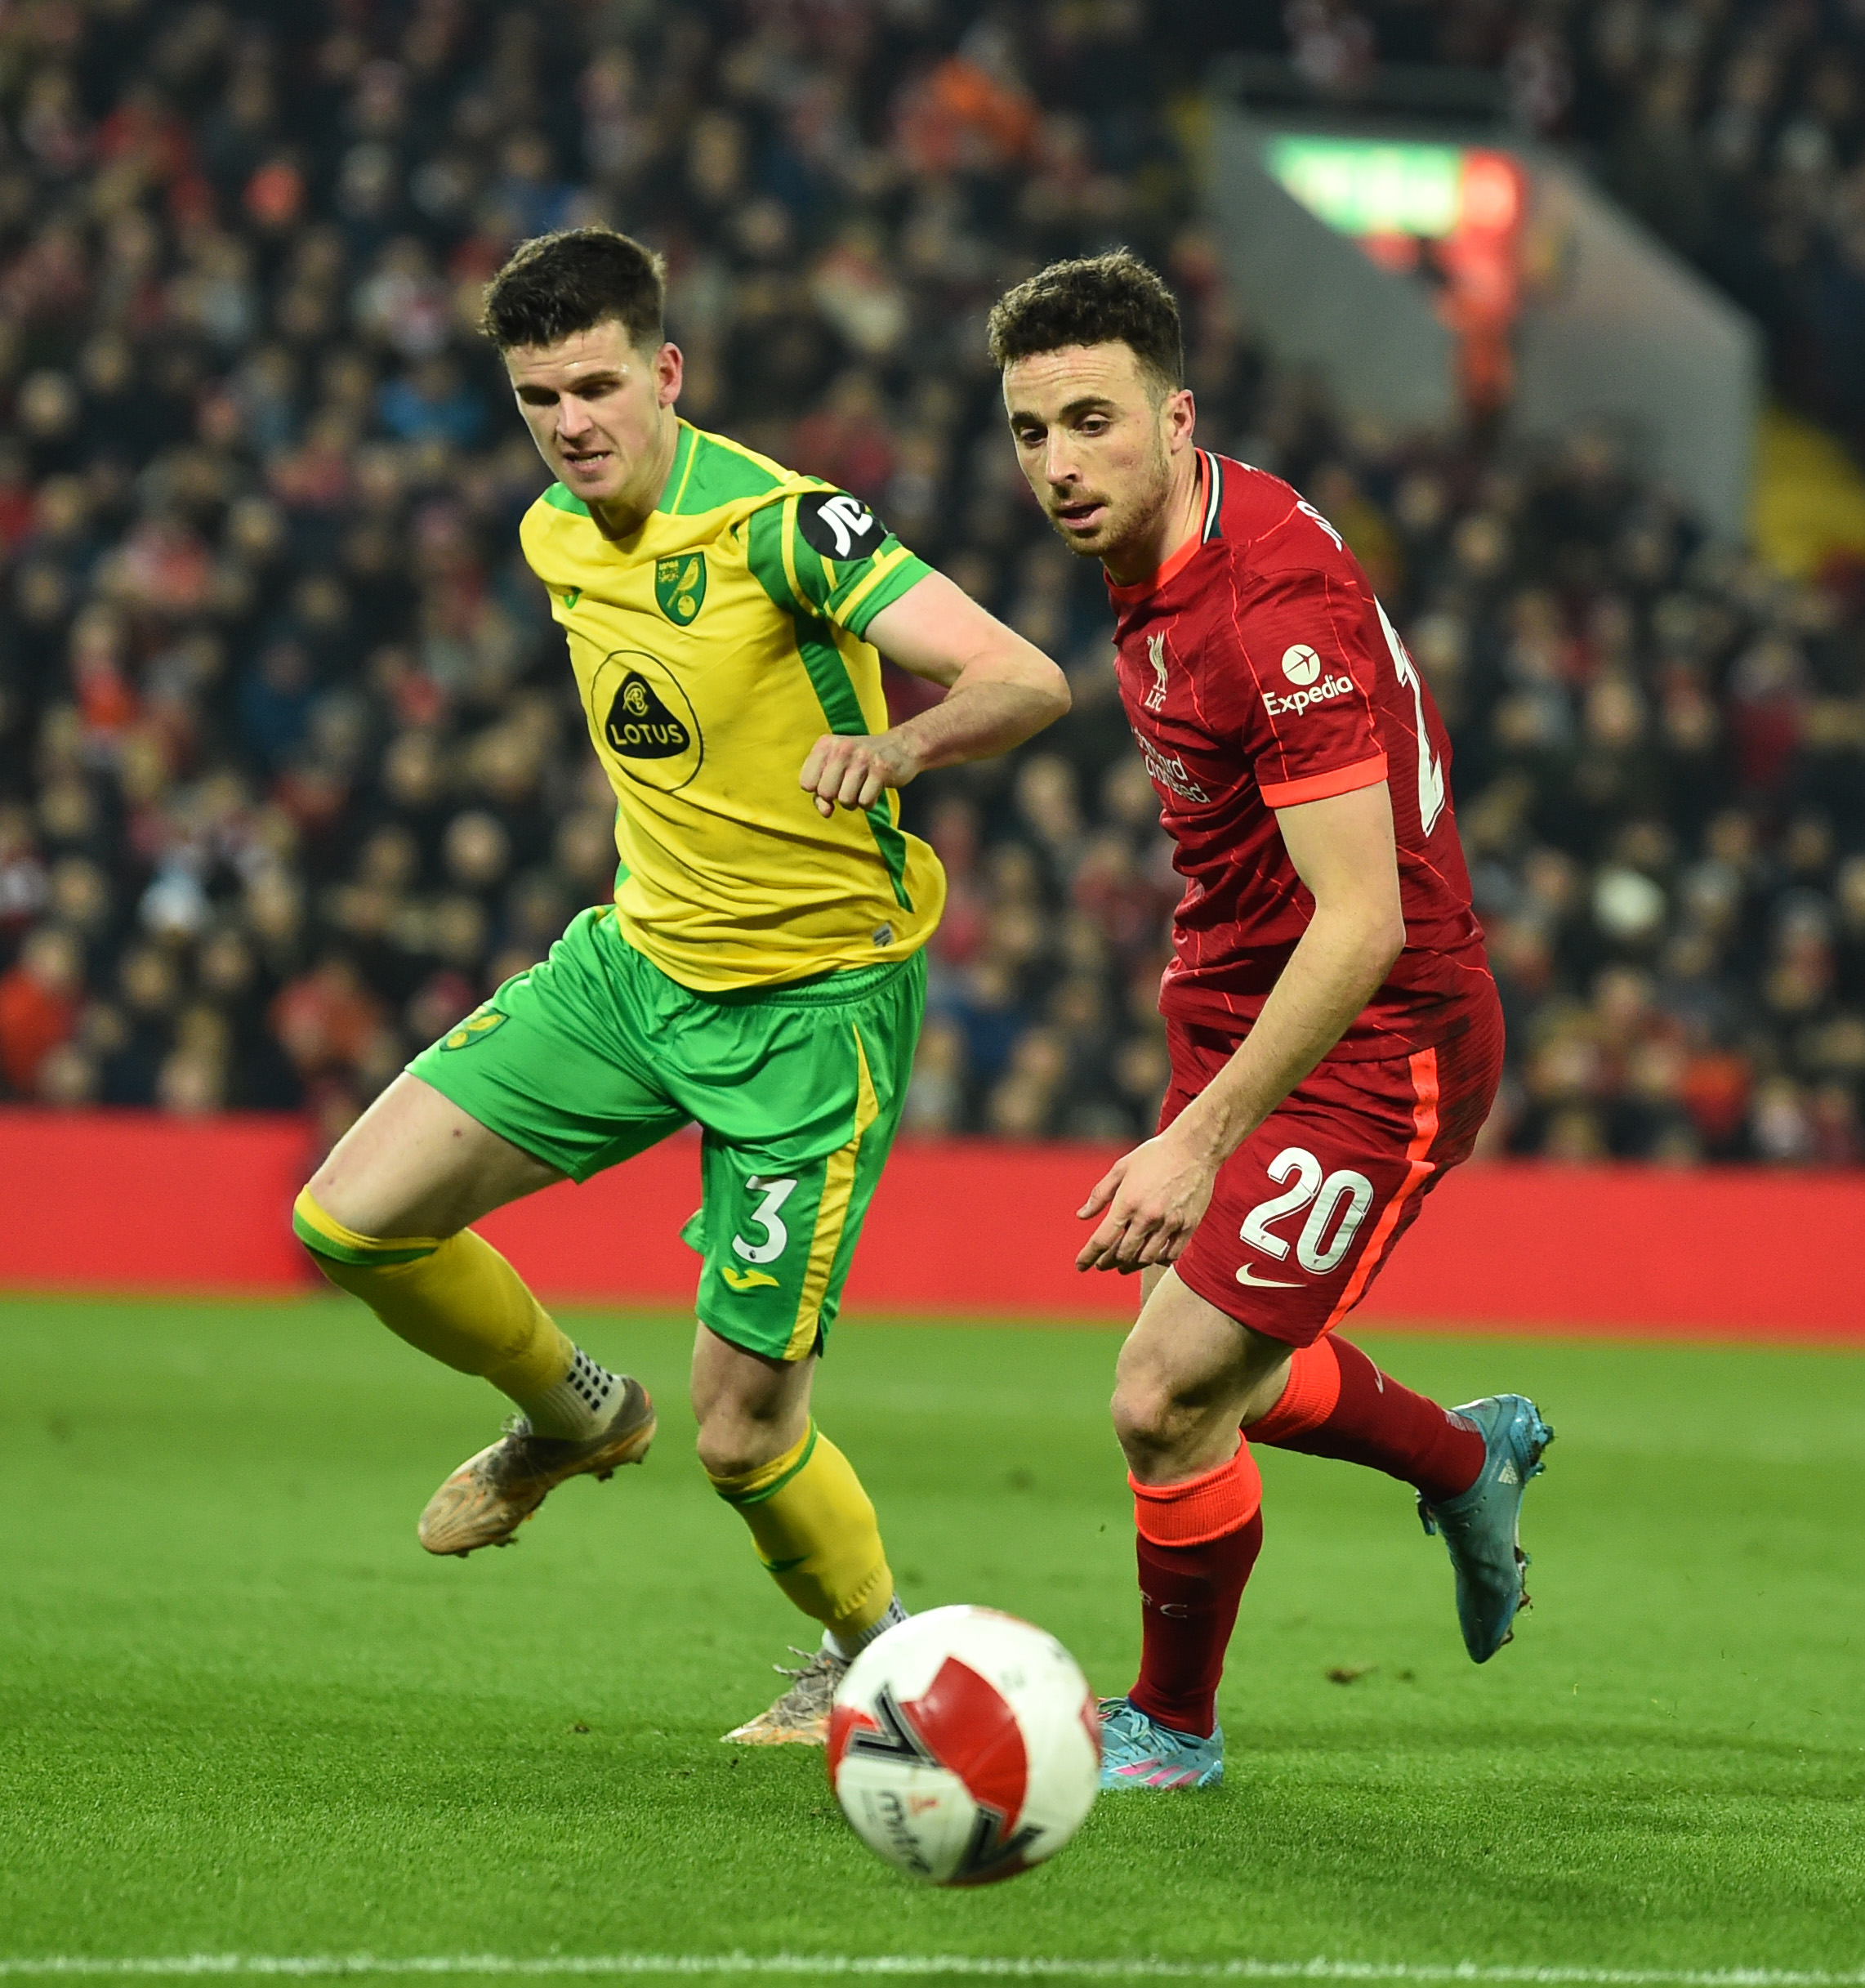 Liverpool 2-1 Norwich City: Emirates FA Cup LIVE - Minamino's first-half brace helps Liverpool beat Norwich to keep quadruple hopes alive 